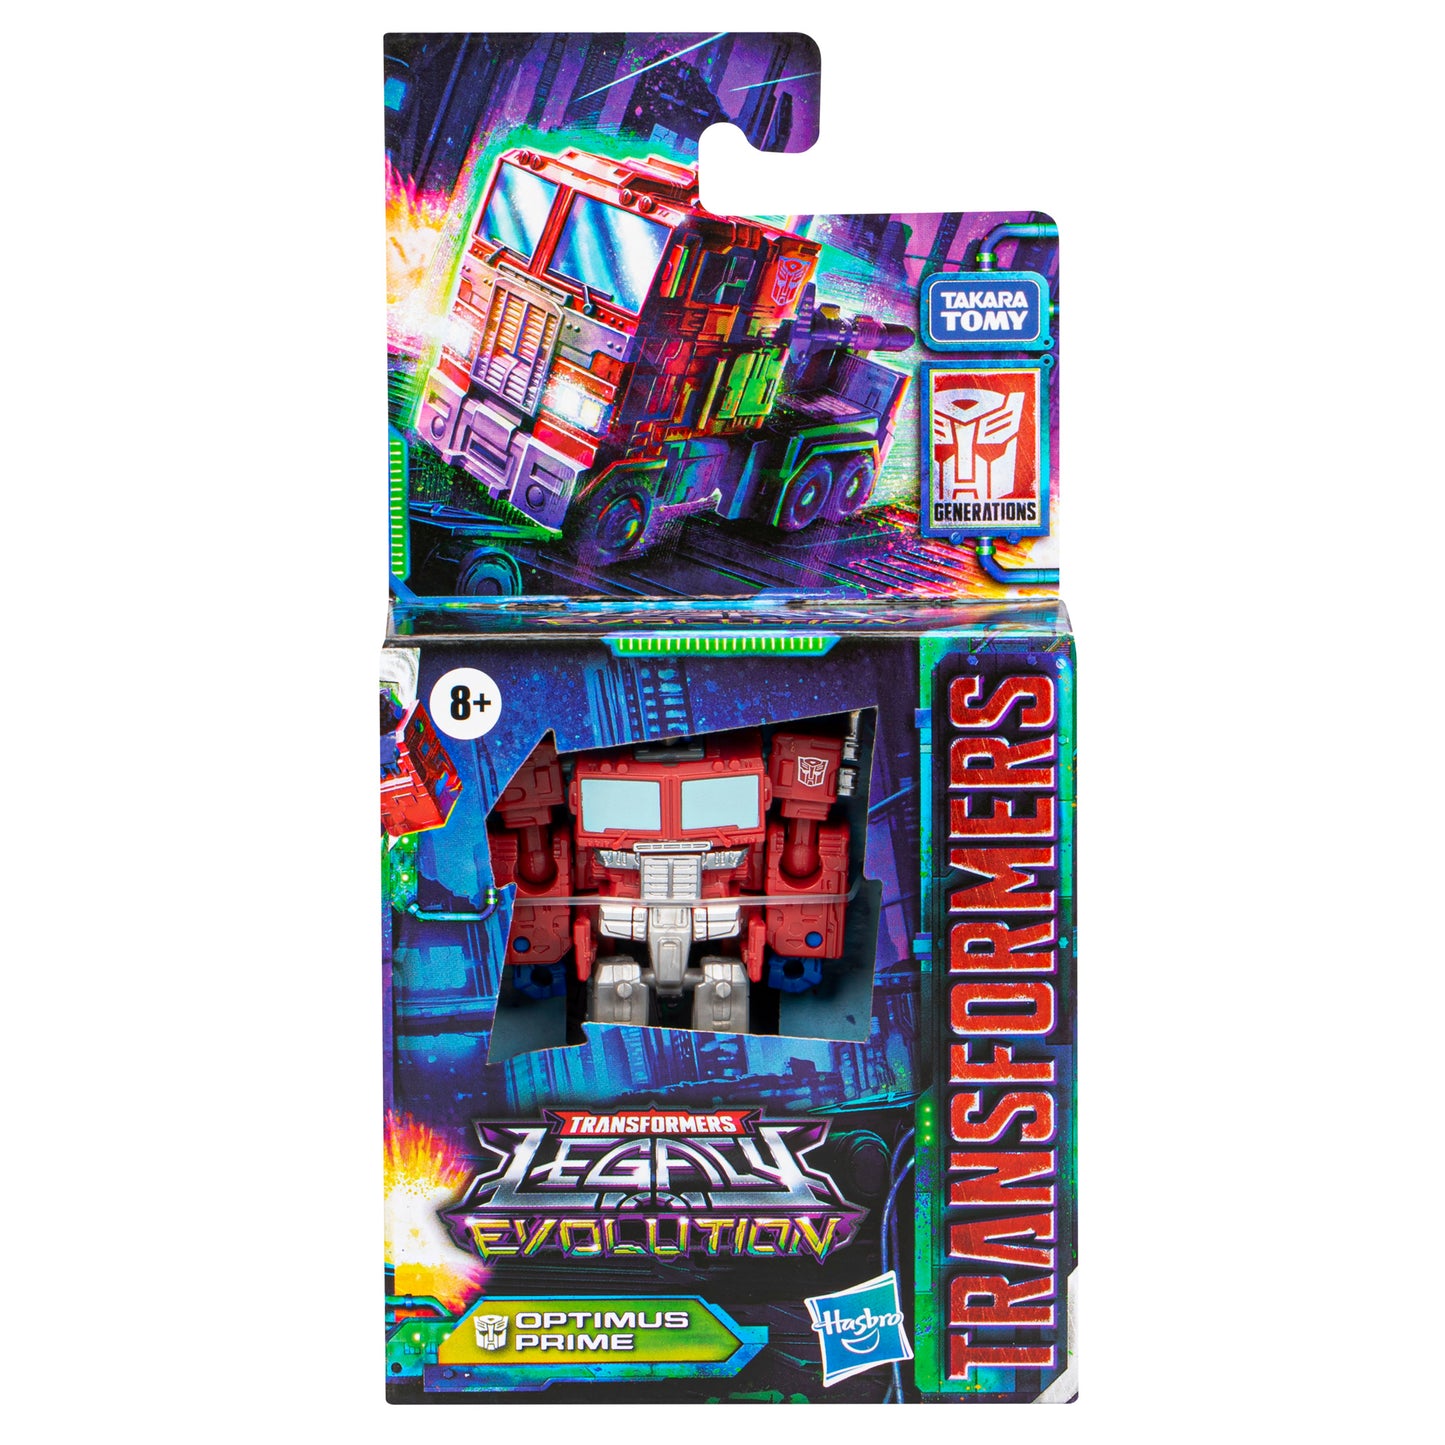 Transfomers Core Class Optimus prime in a package - Heretoserveyou